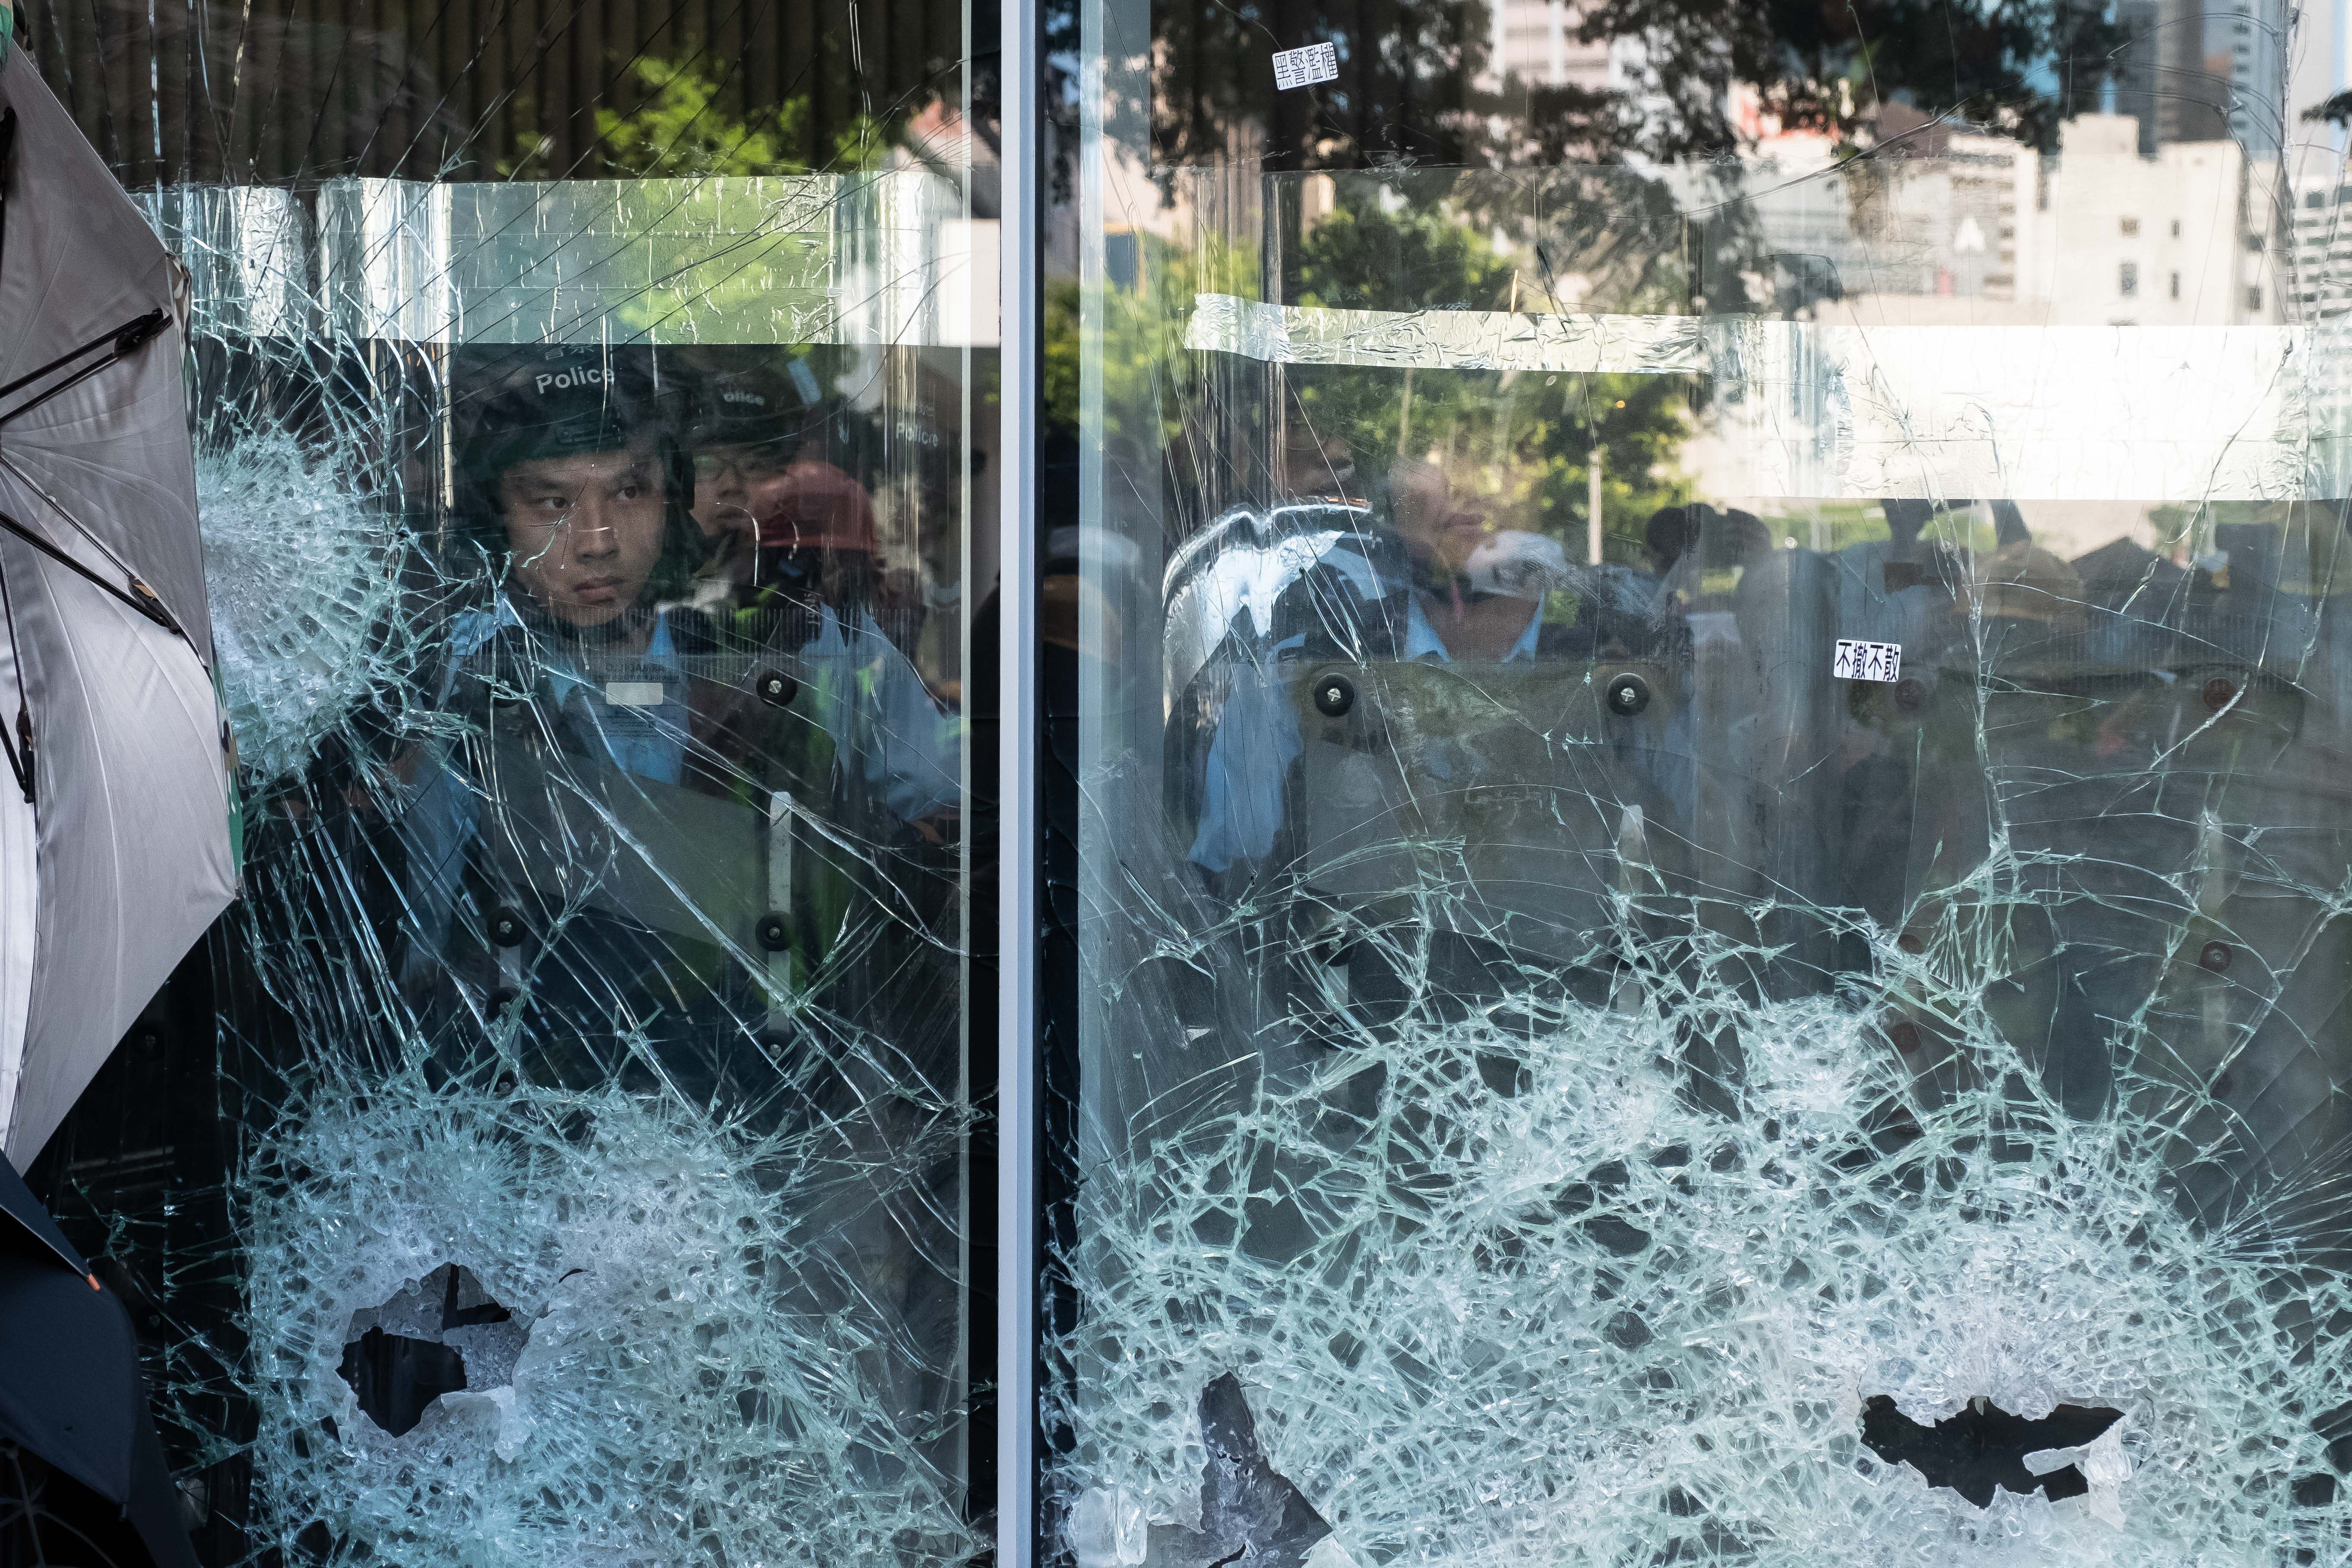 Protesters smash glass doors and windows of the Legislative Council complex on July 01, 2019 in Hong Kong.